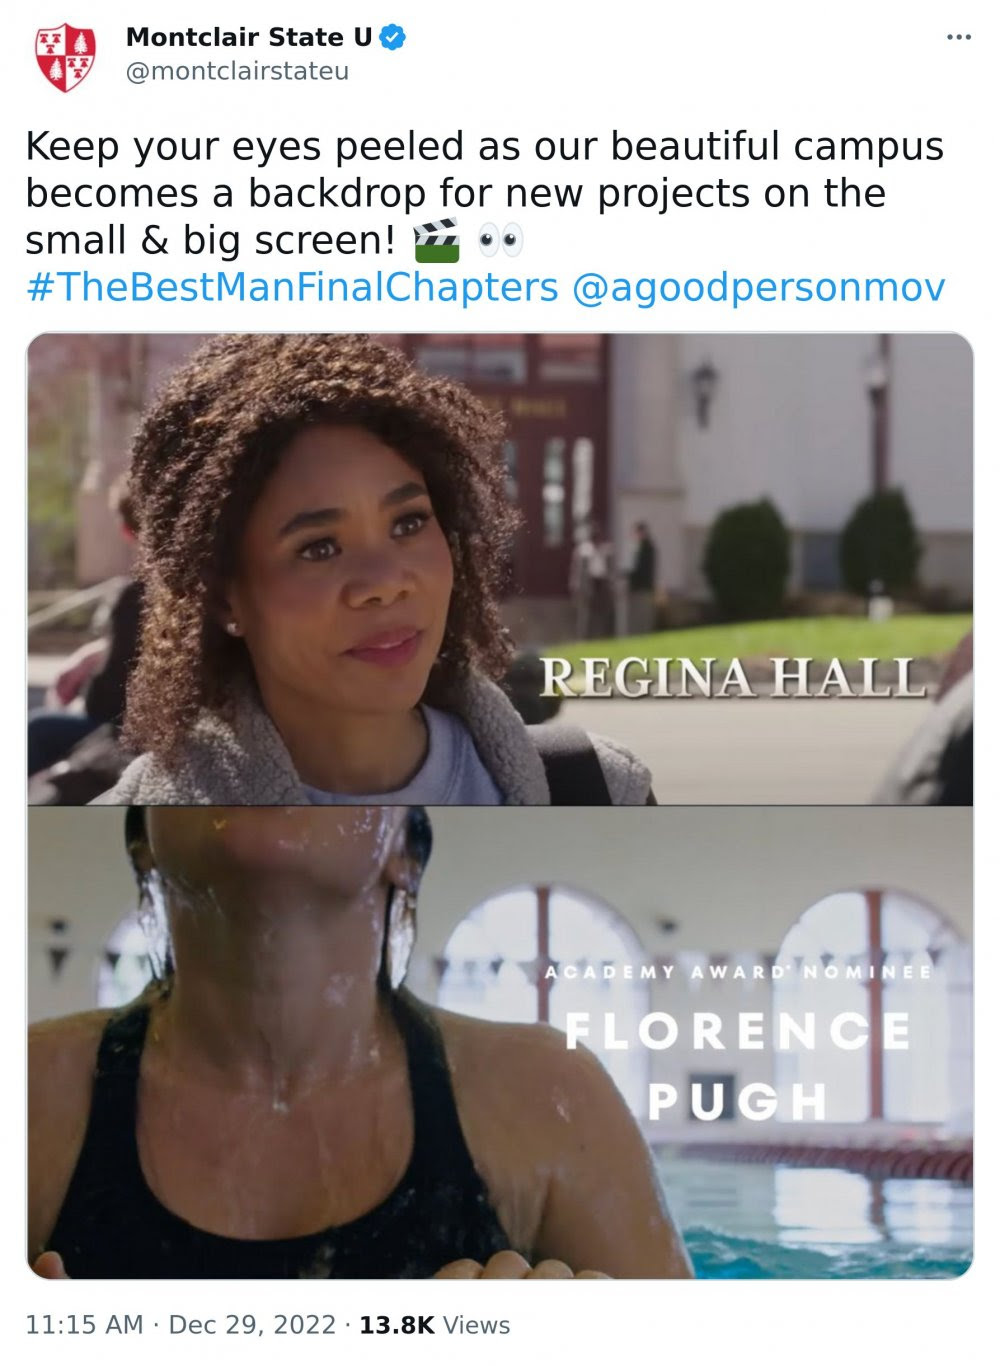 Regina Hall and Florence Pugh bring star quality to Montclair State University campus in scenes filmed on campus for TV and film.